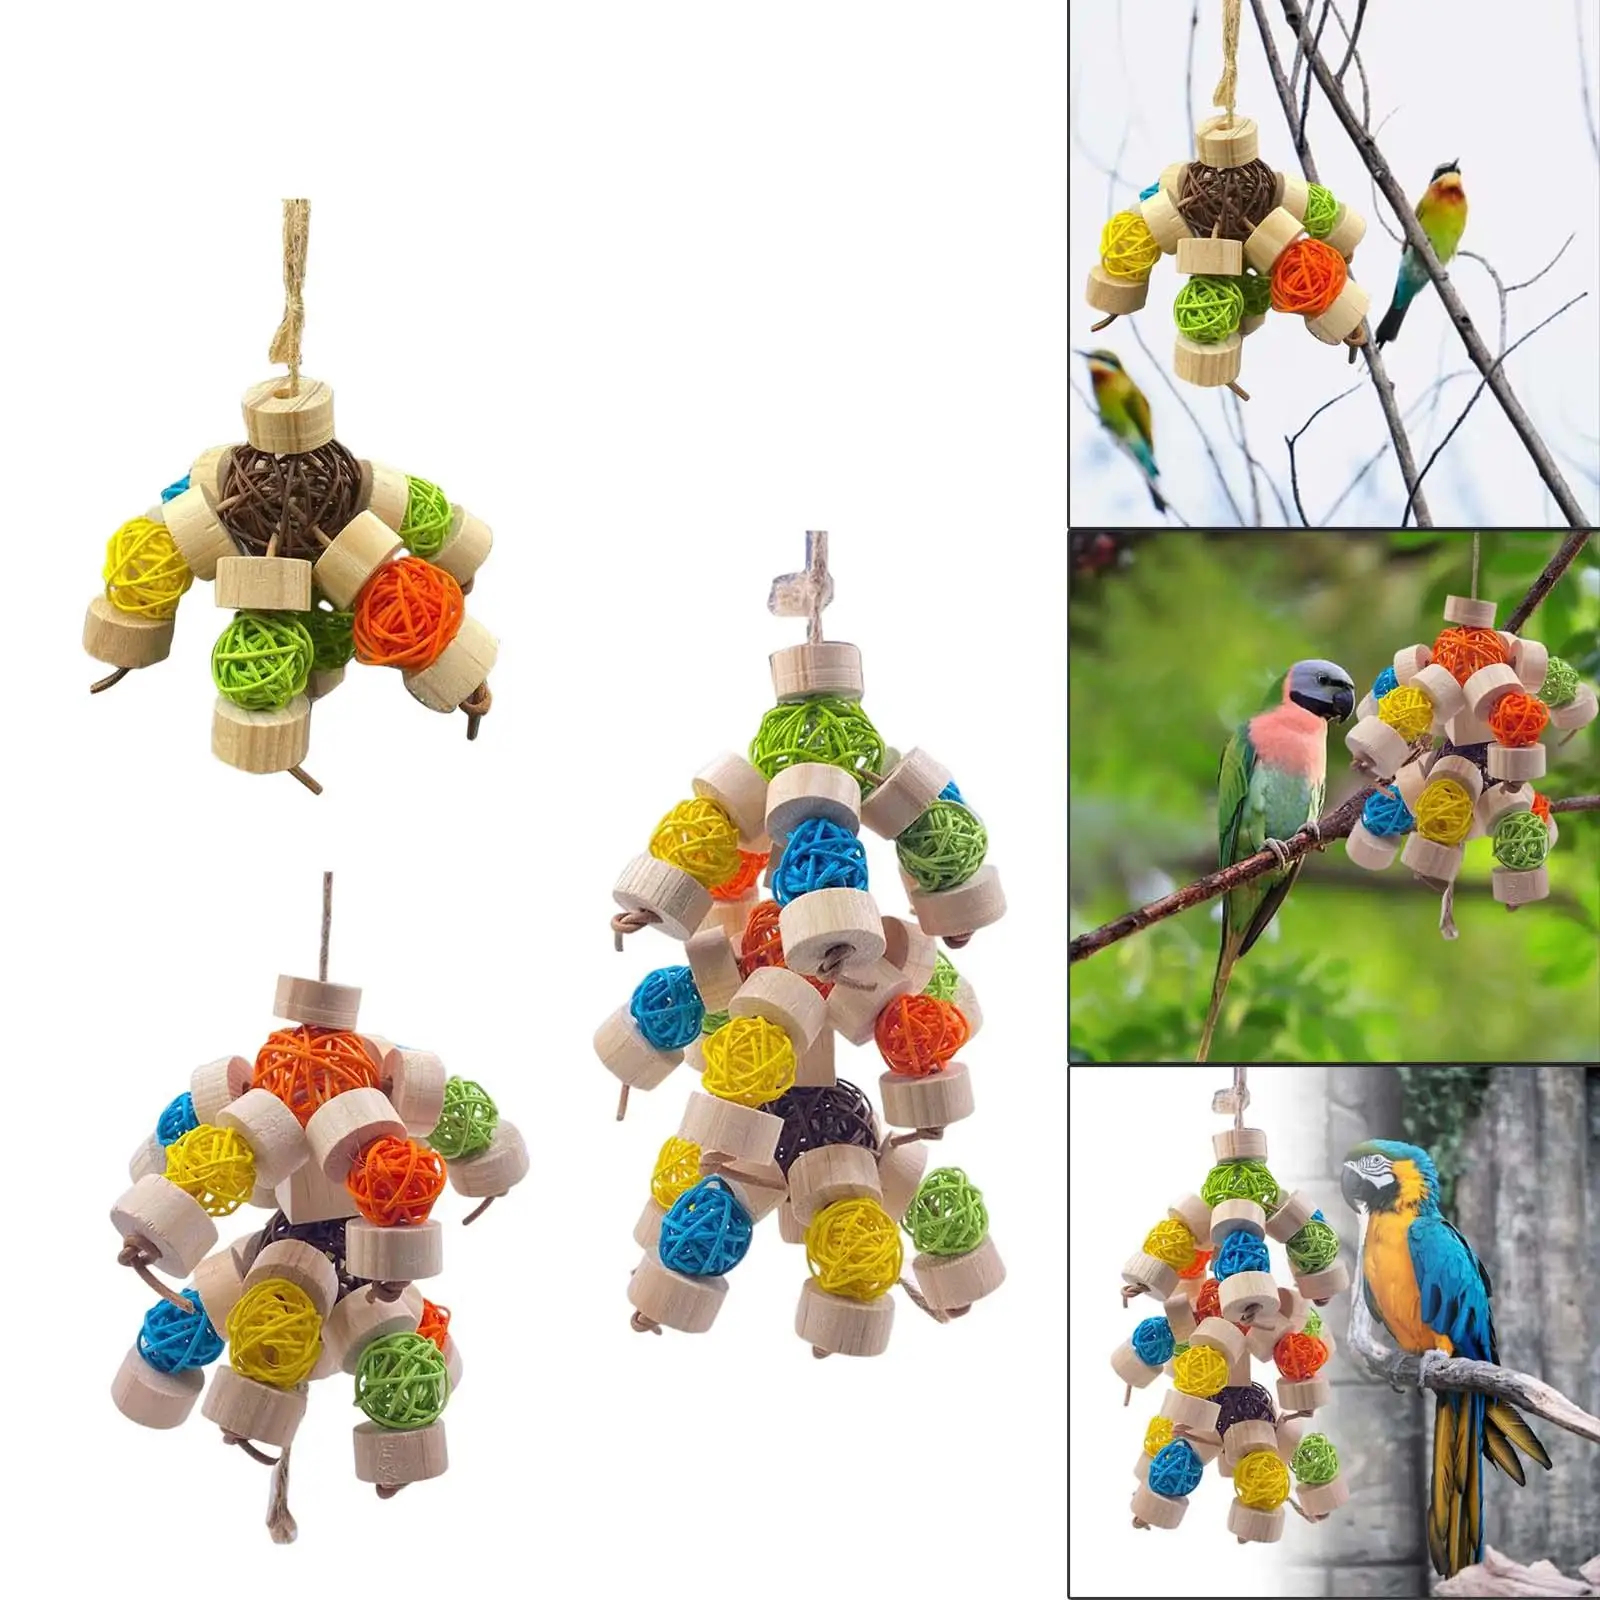 Multicolored Rattan Balls Bird Block Knots Tearing Toy Wood Hanging Natural Parrot Chewing Toy for Canary Gift Entertainment